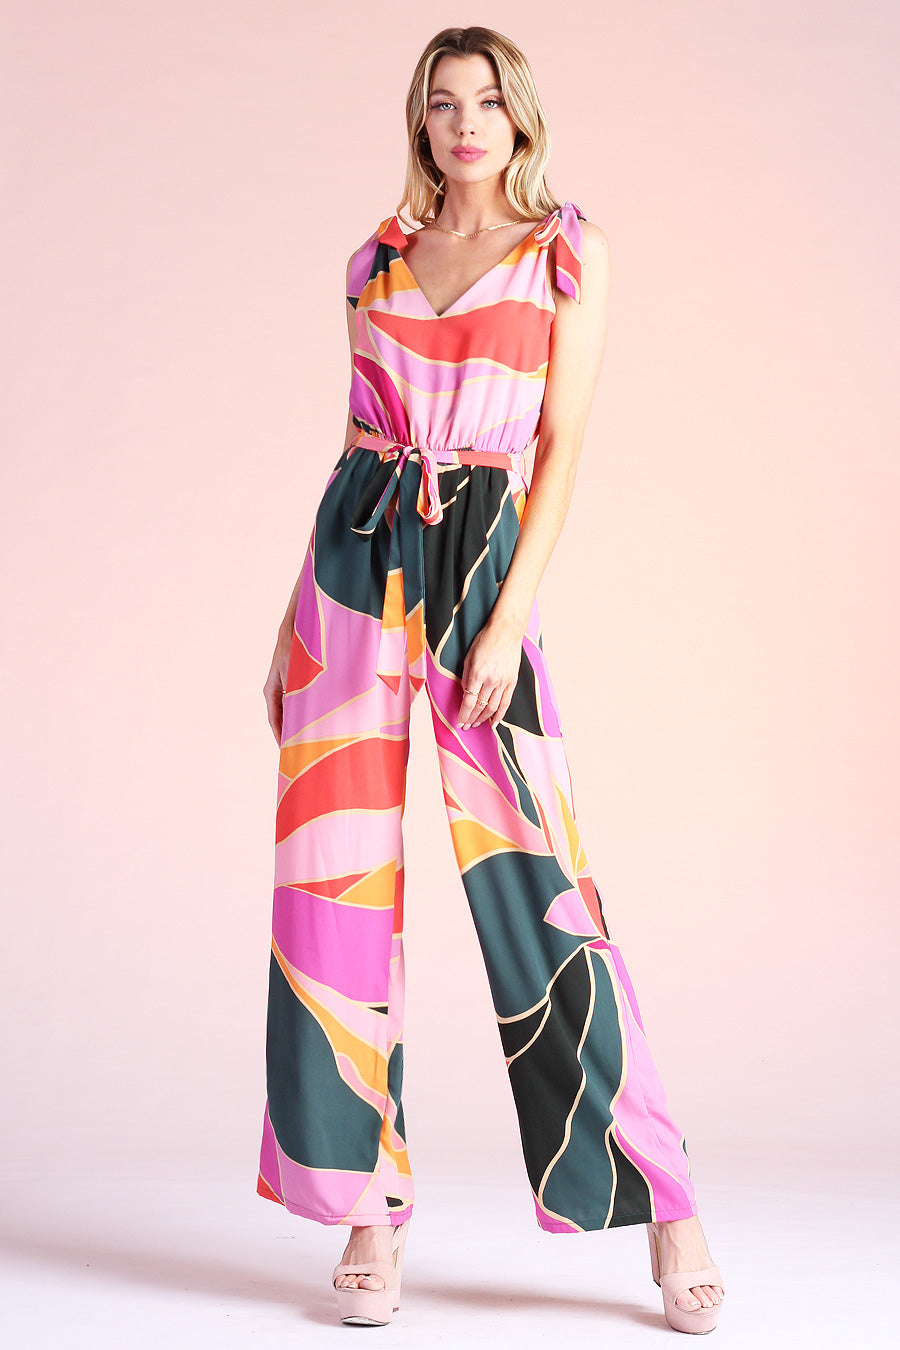 Blonde model leaning to the side, wearing pink, green and orange metamorphosis printed jumpsuit complete with ties on shoulders and pockets